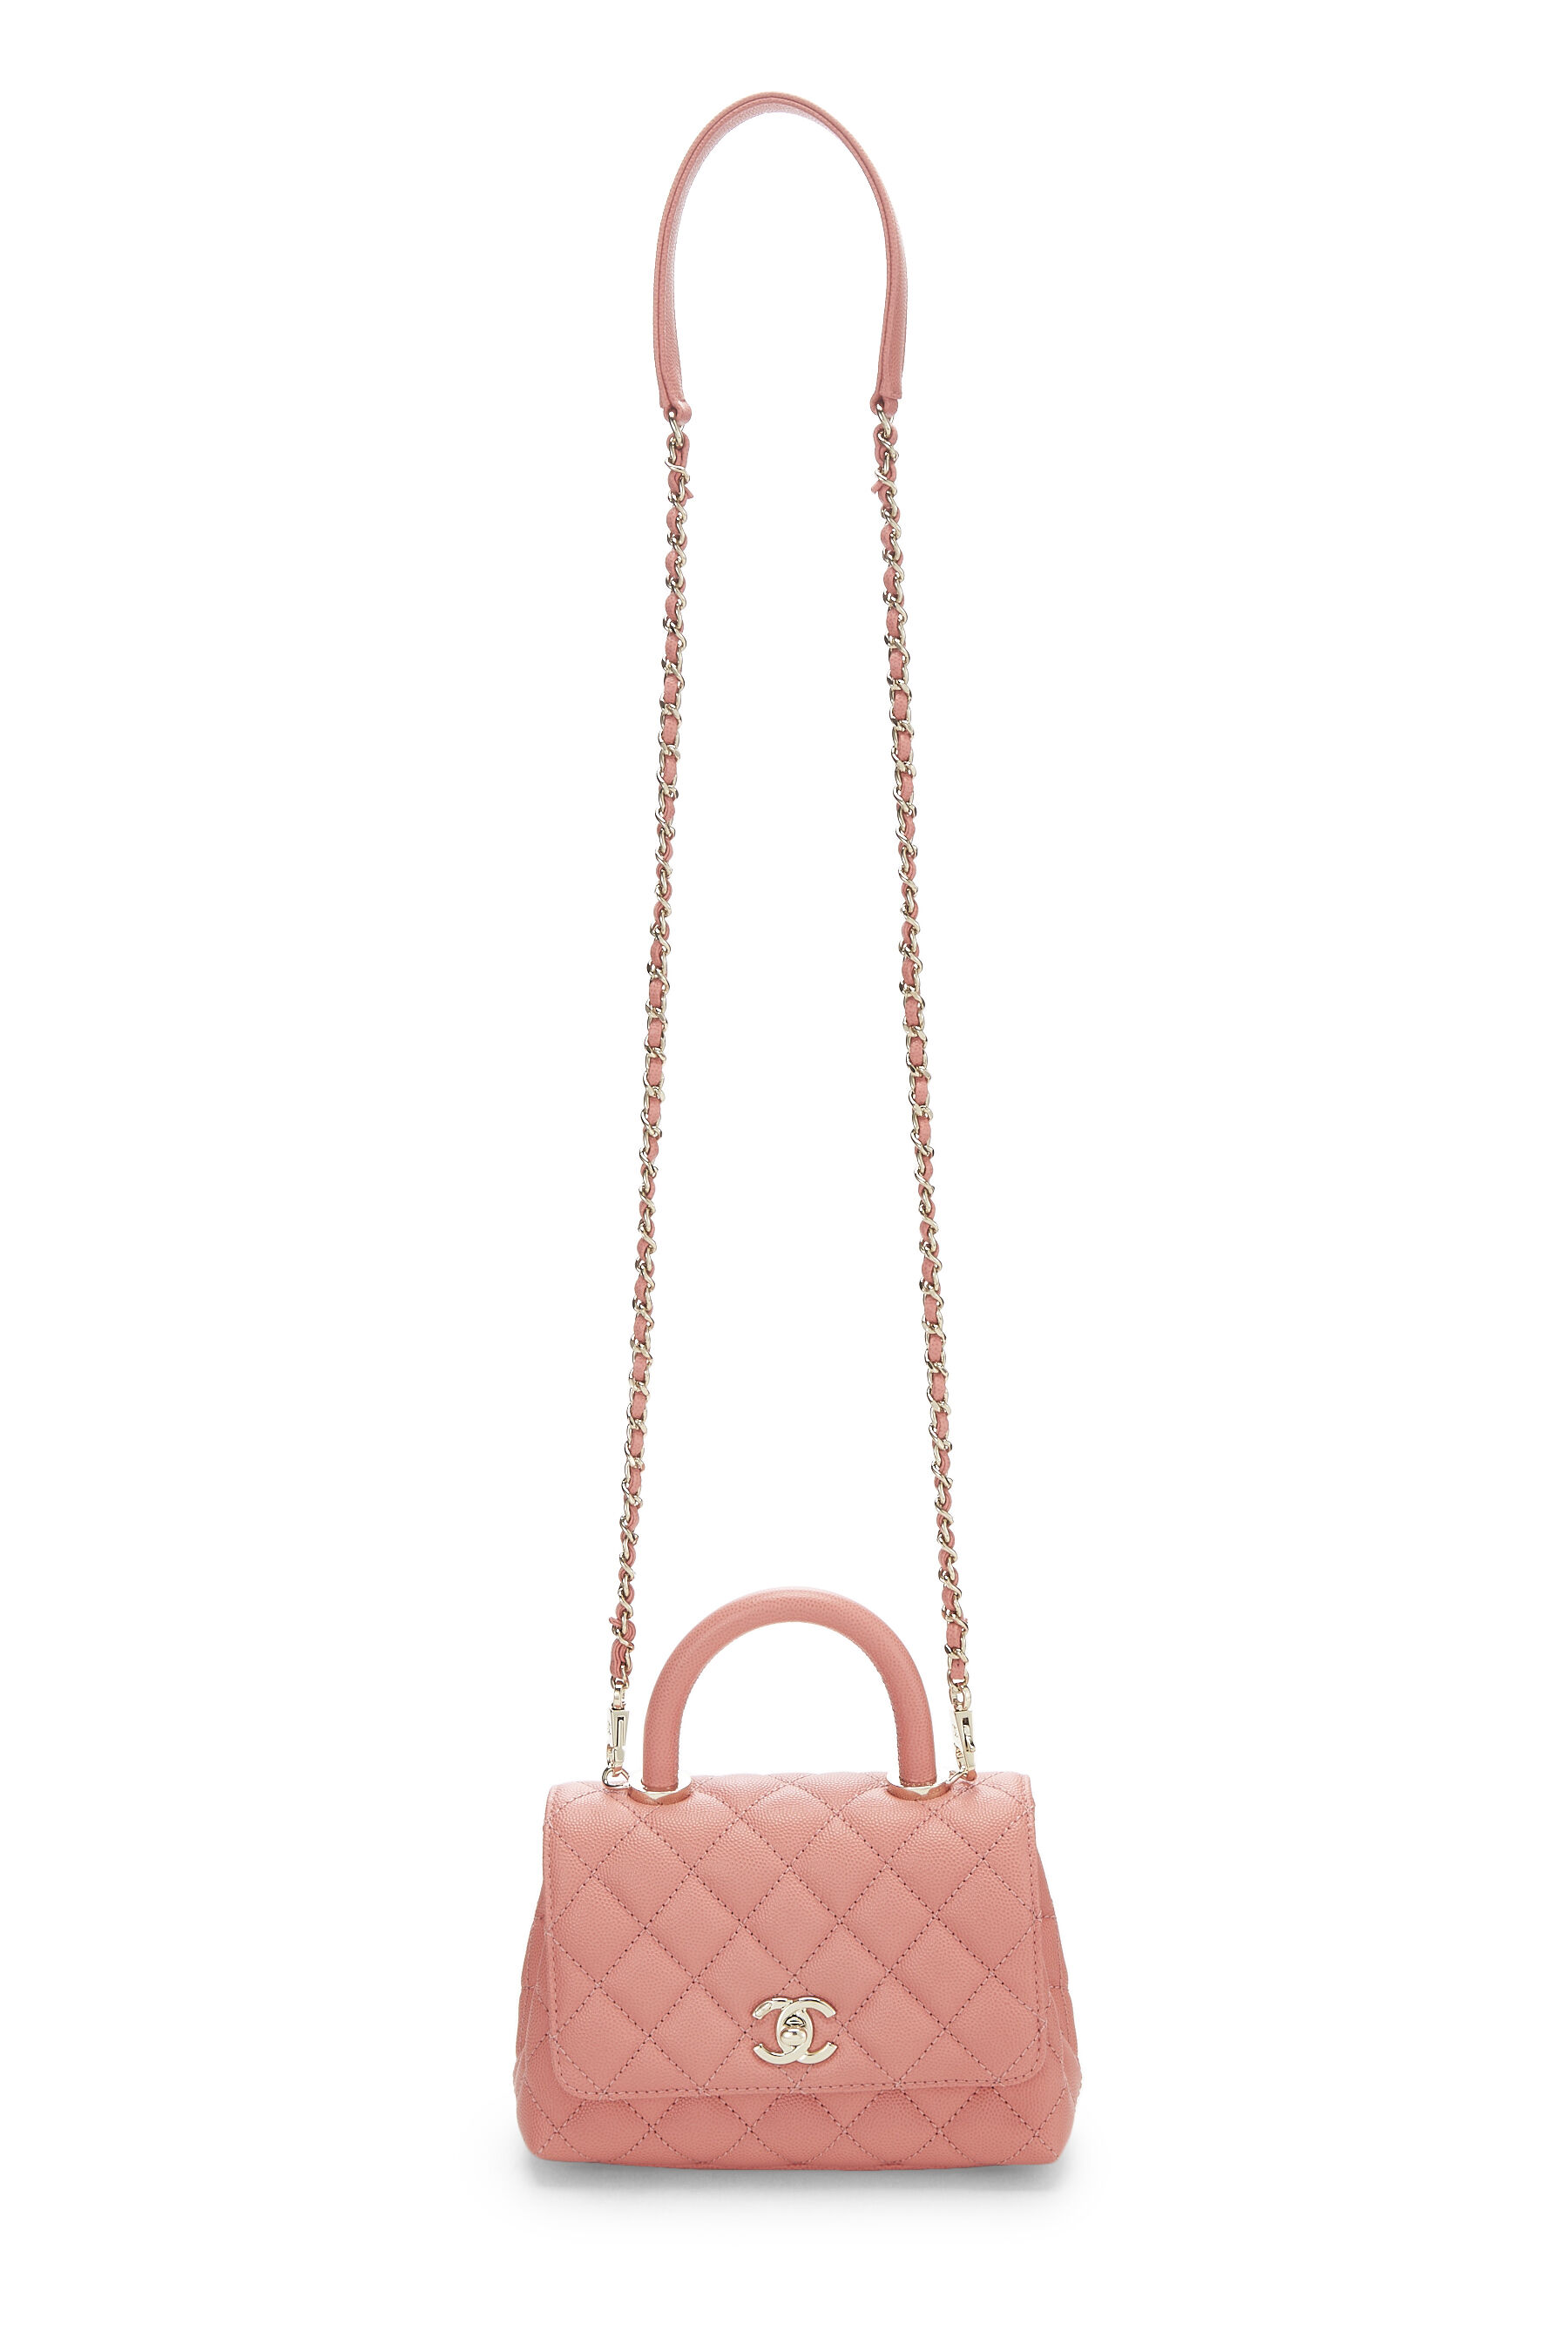 CHANEL Medium Coco Quilted Caviar Leather Top Handle